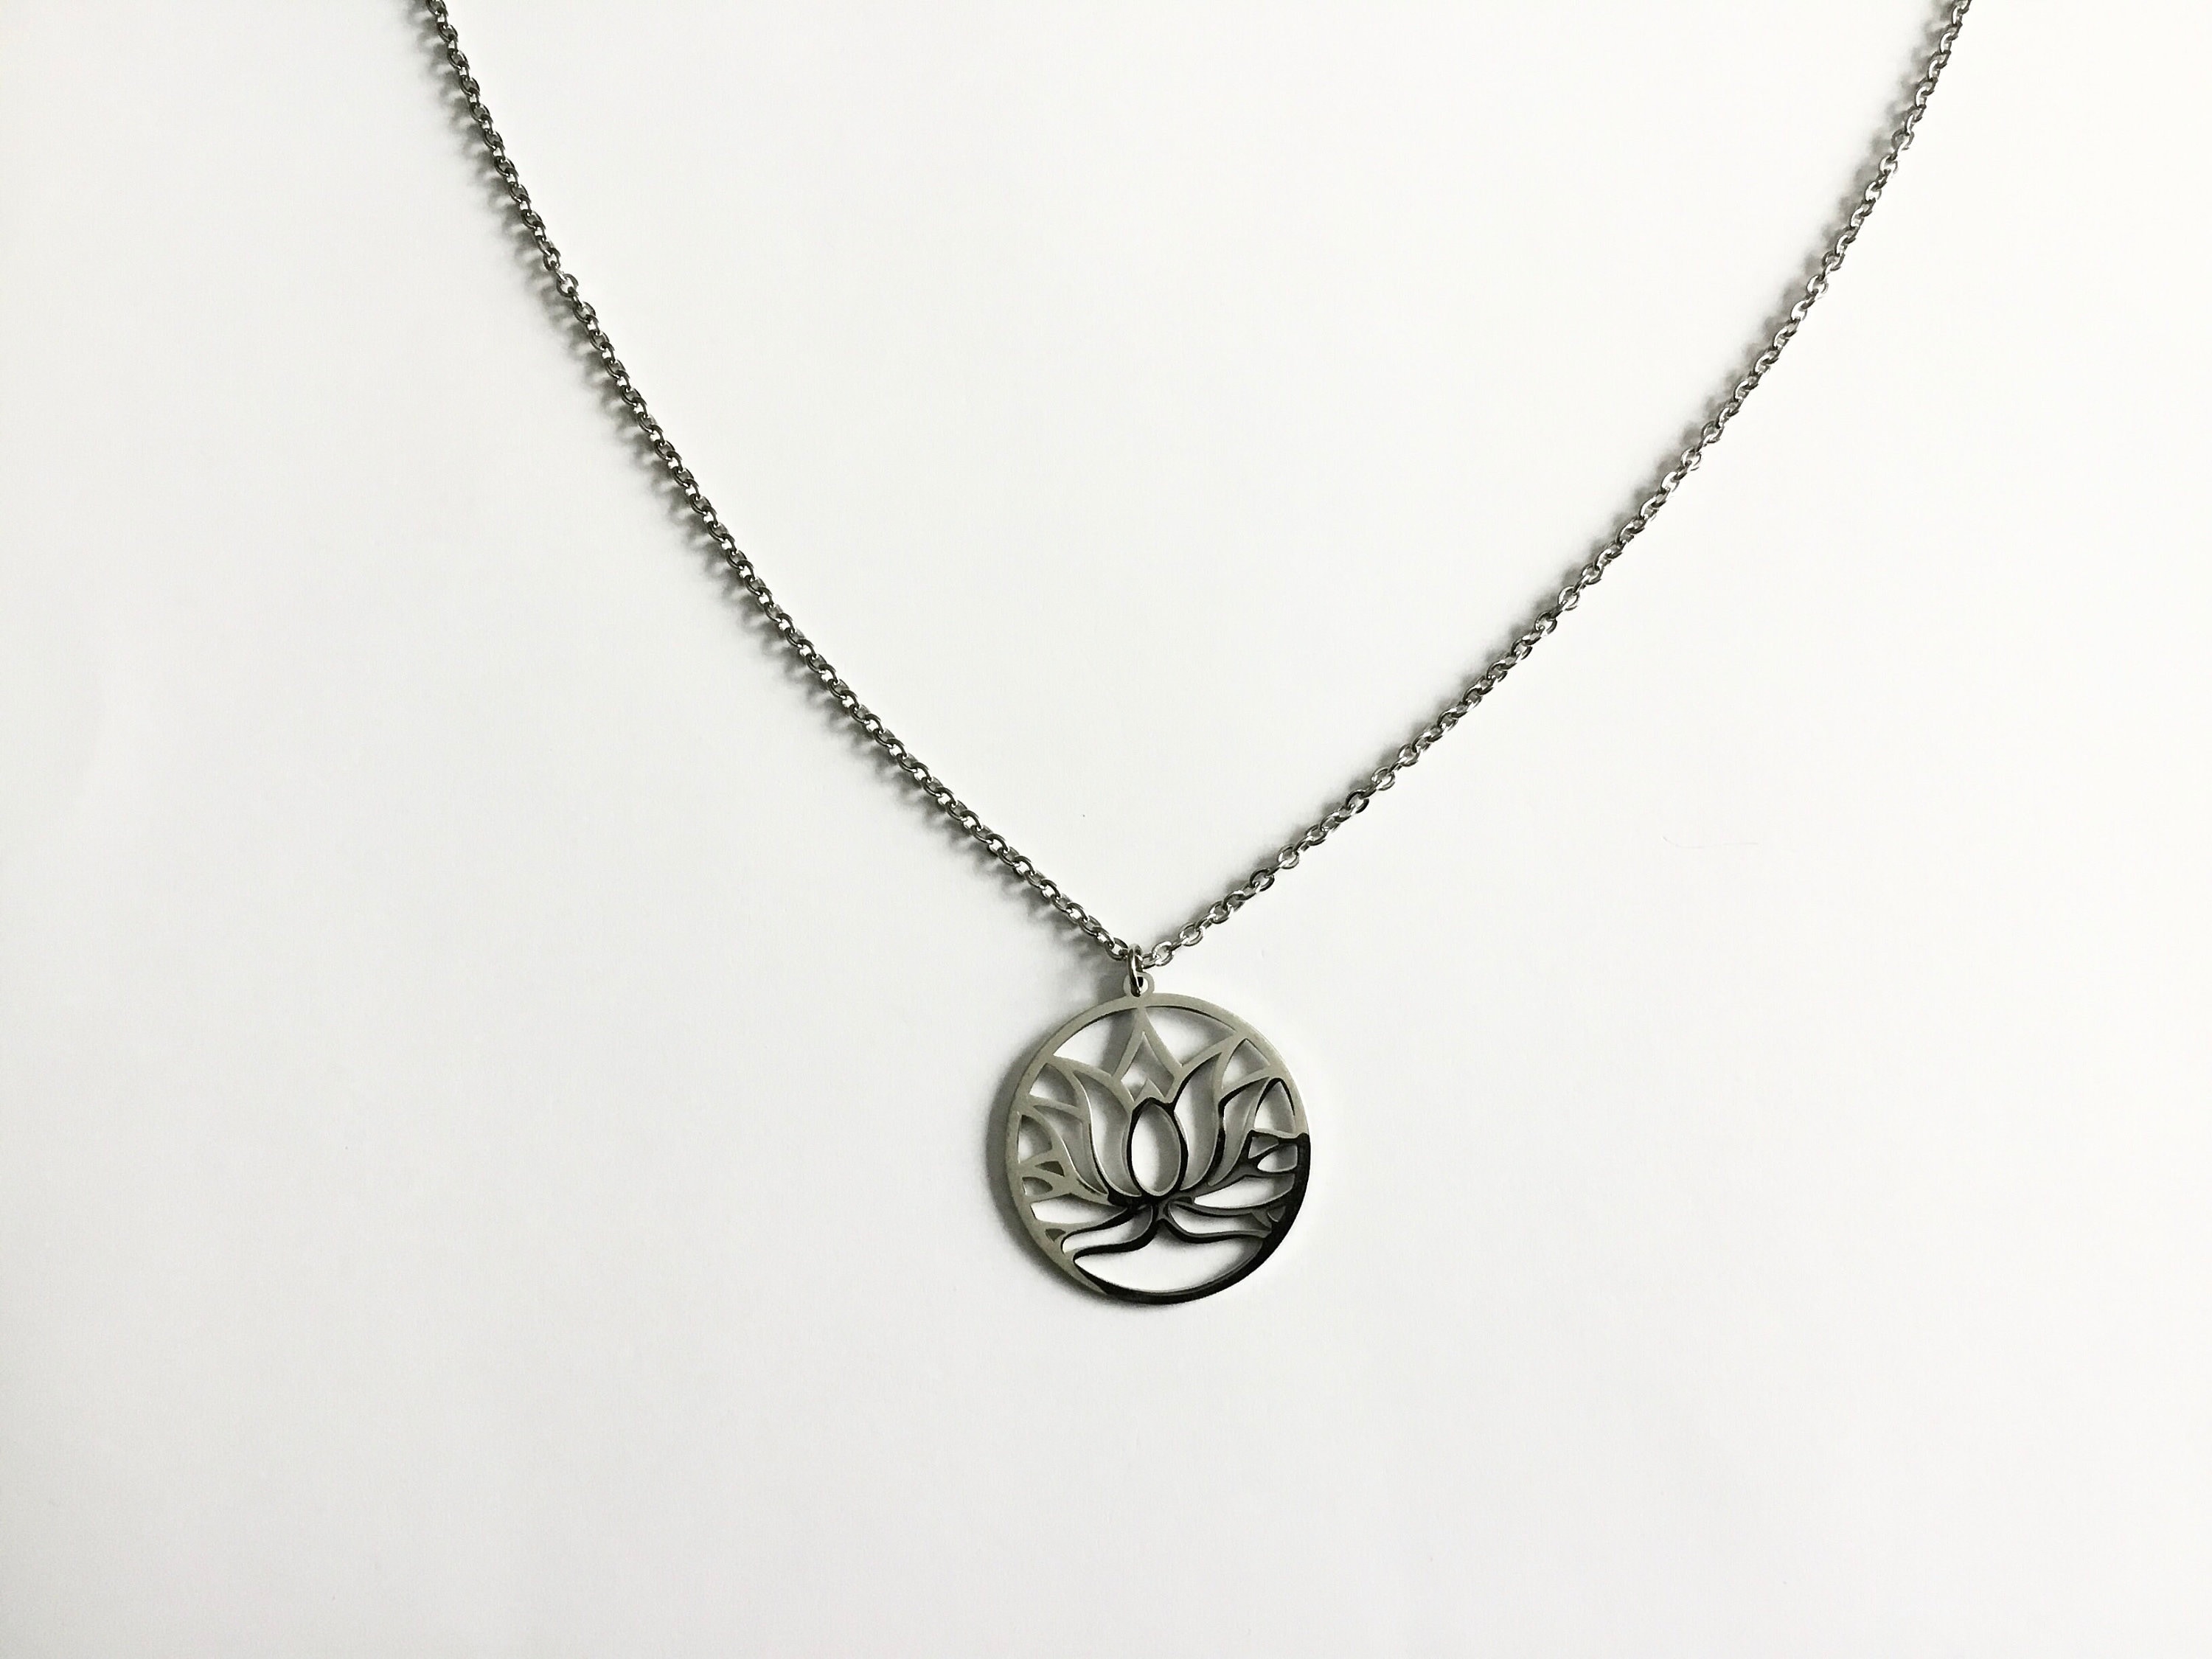 Lotus flower necklace in silver stainless steel